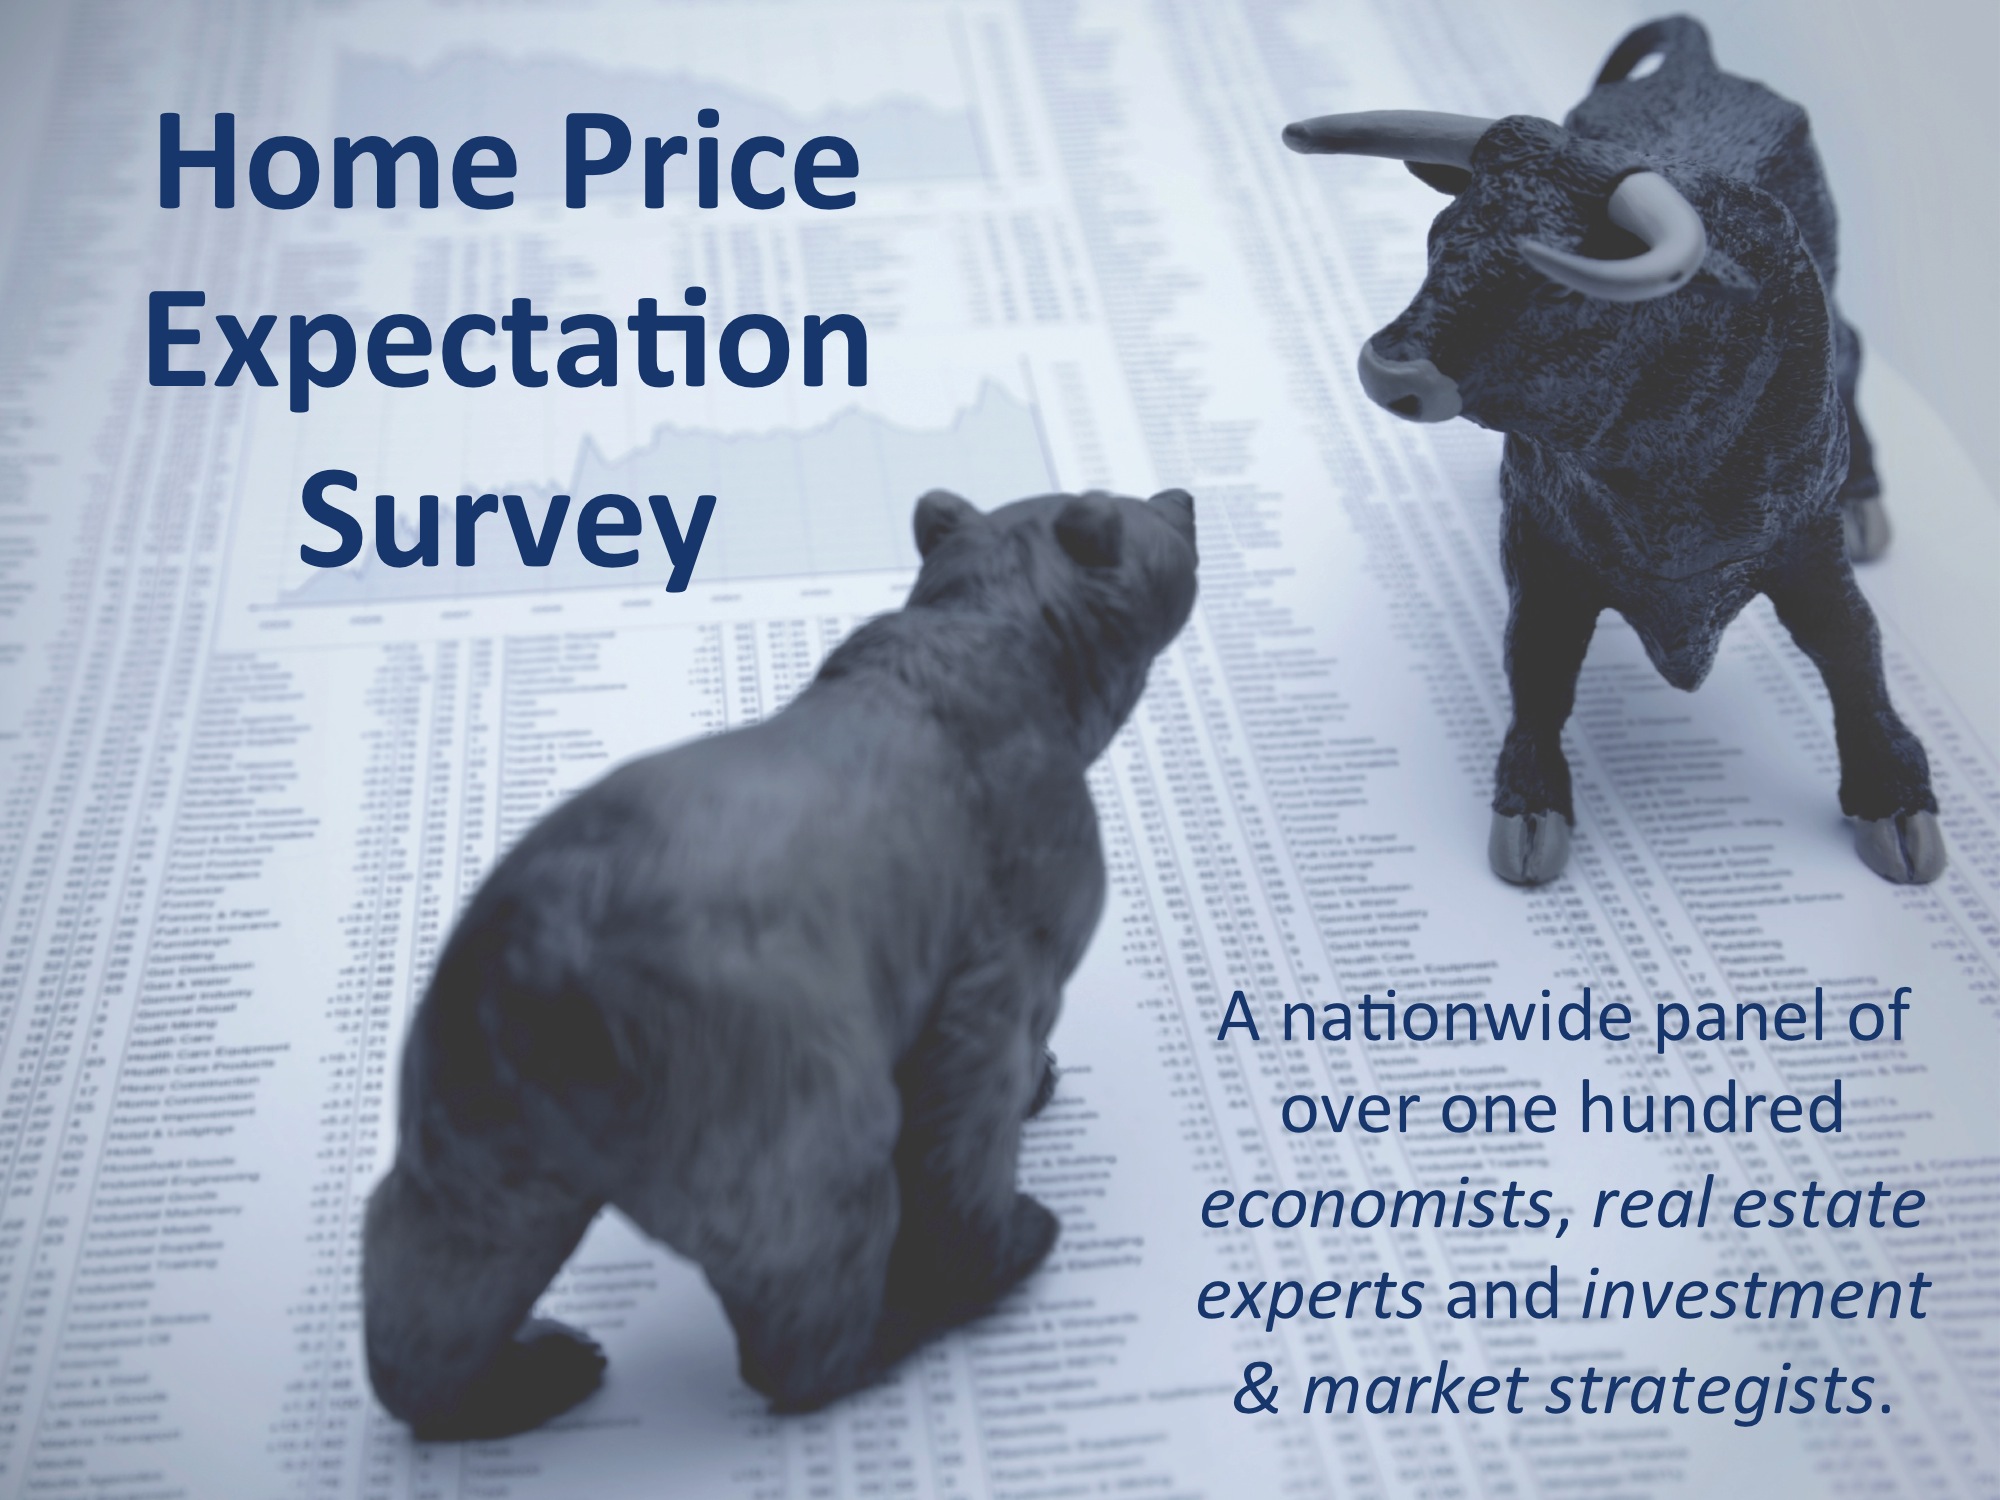 Where Do The Experts Say Home Prices Are Going?